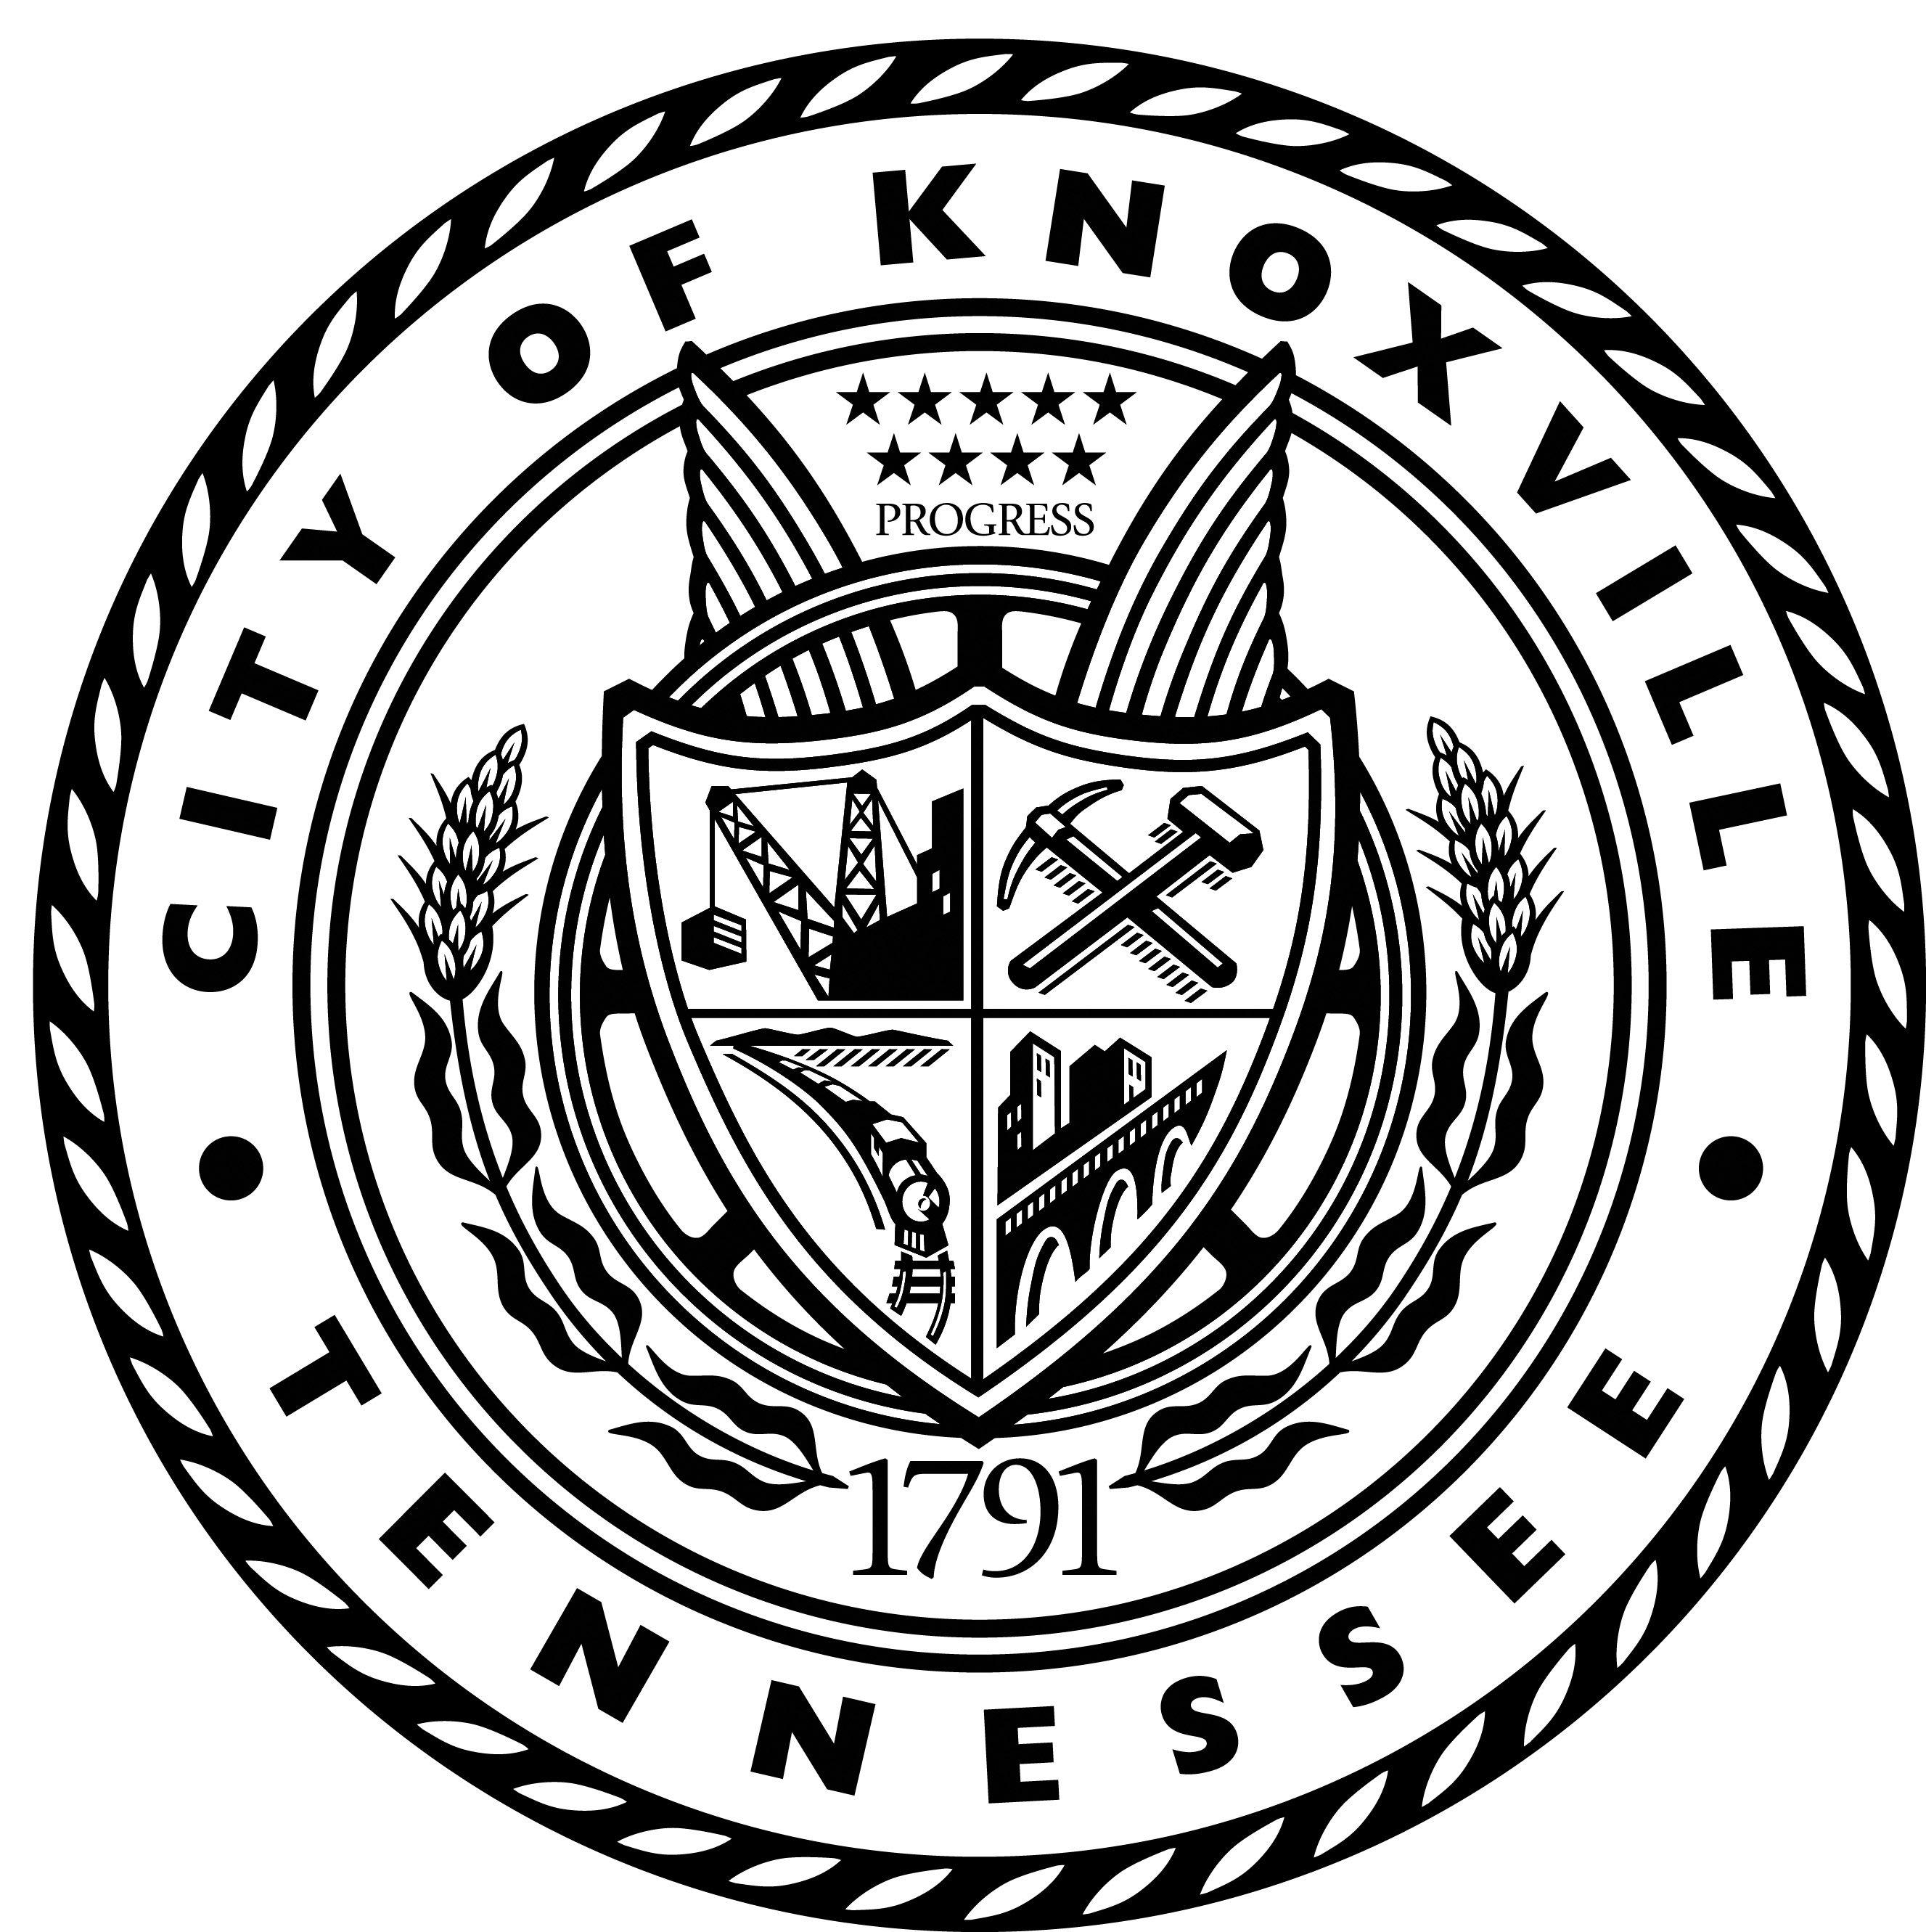 Knoxville Logo - Logos & Seals - City of Knoxville